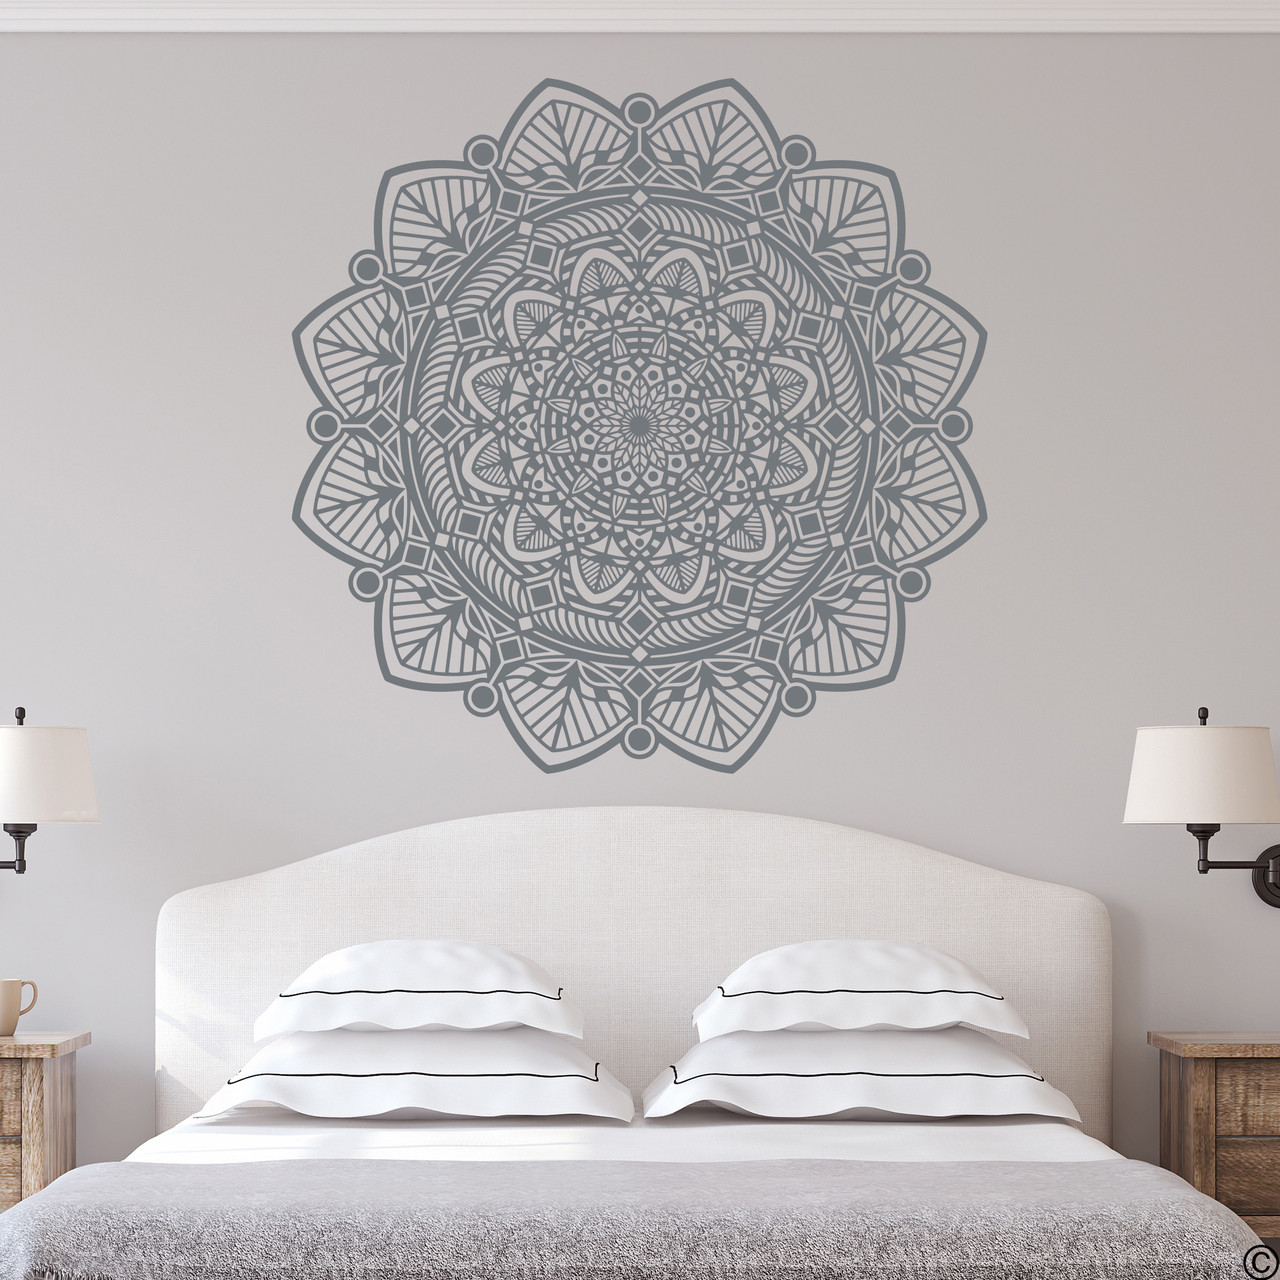 The Taj mandala wall decal shown here in the storm grey vinyl color.